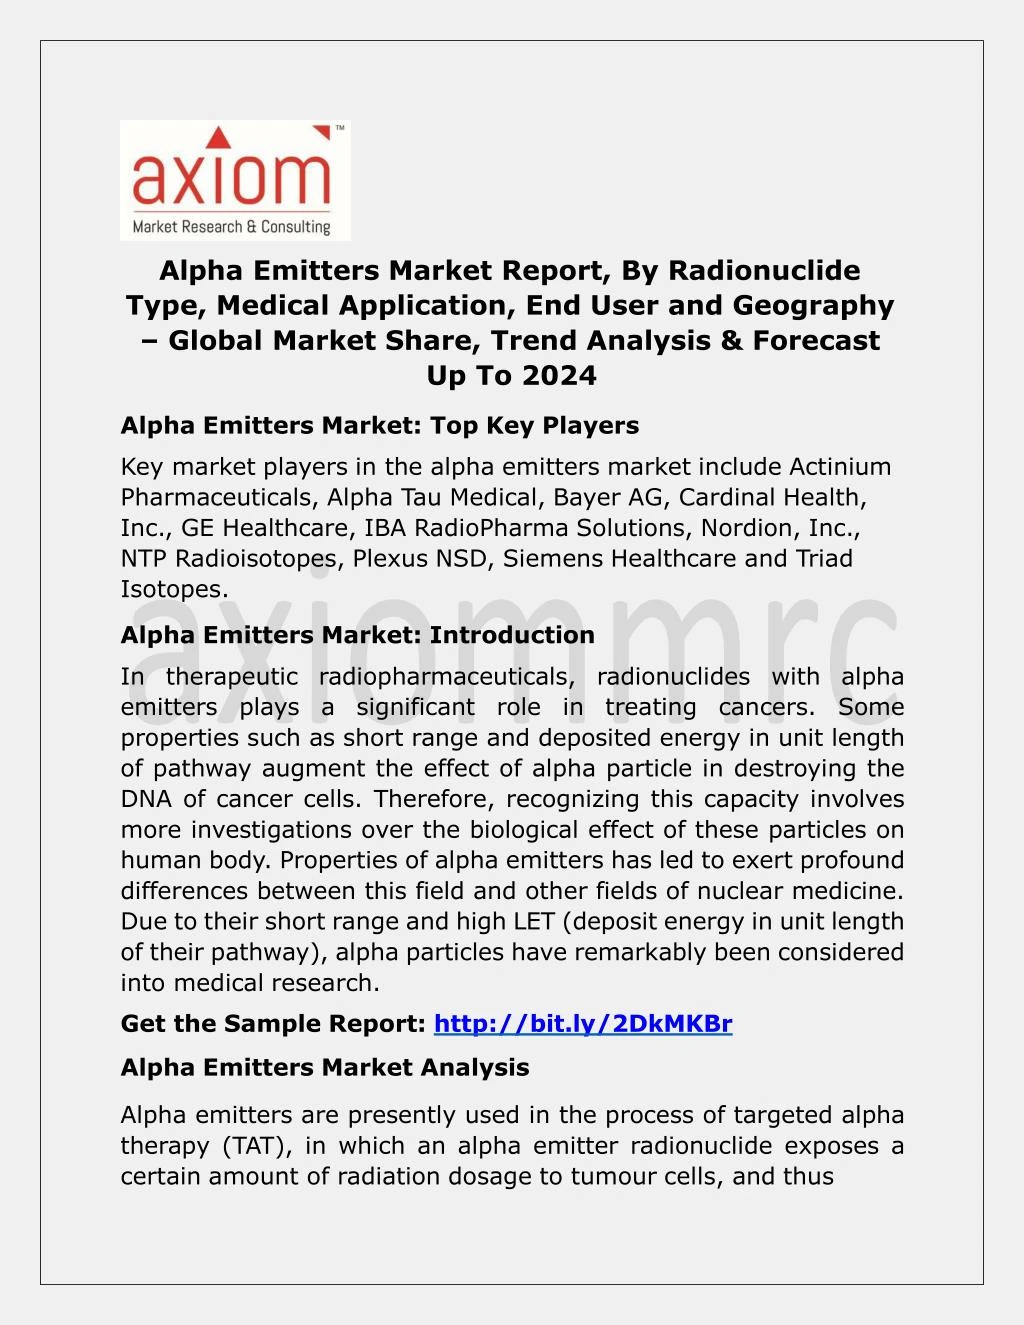 alpha emitters market report by radionuclide type